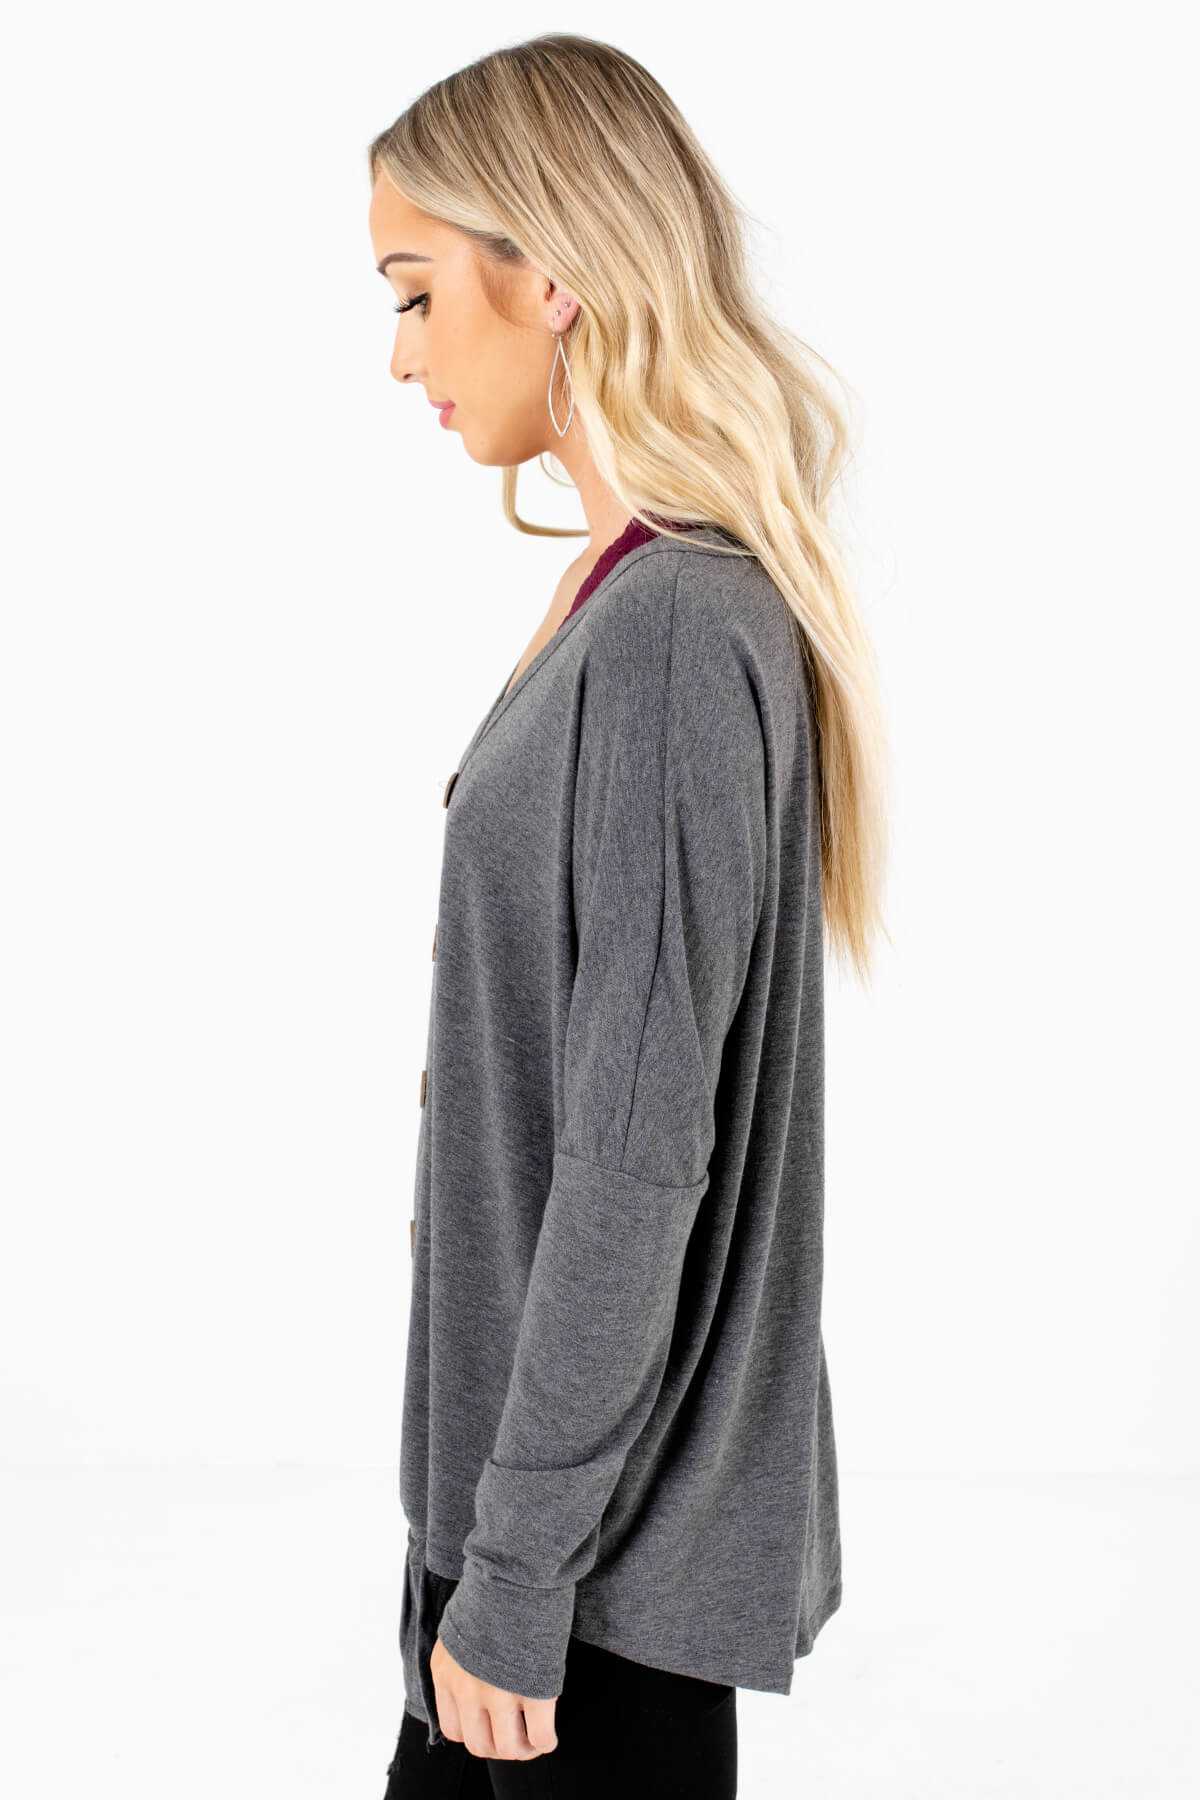 Charcoal Gray Long Sleeve Boutique Tops for Women